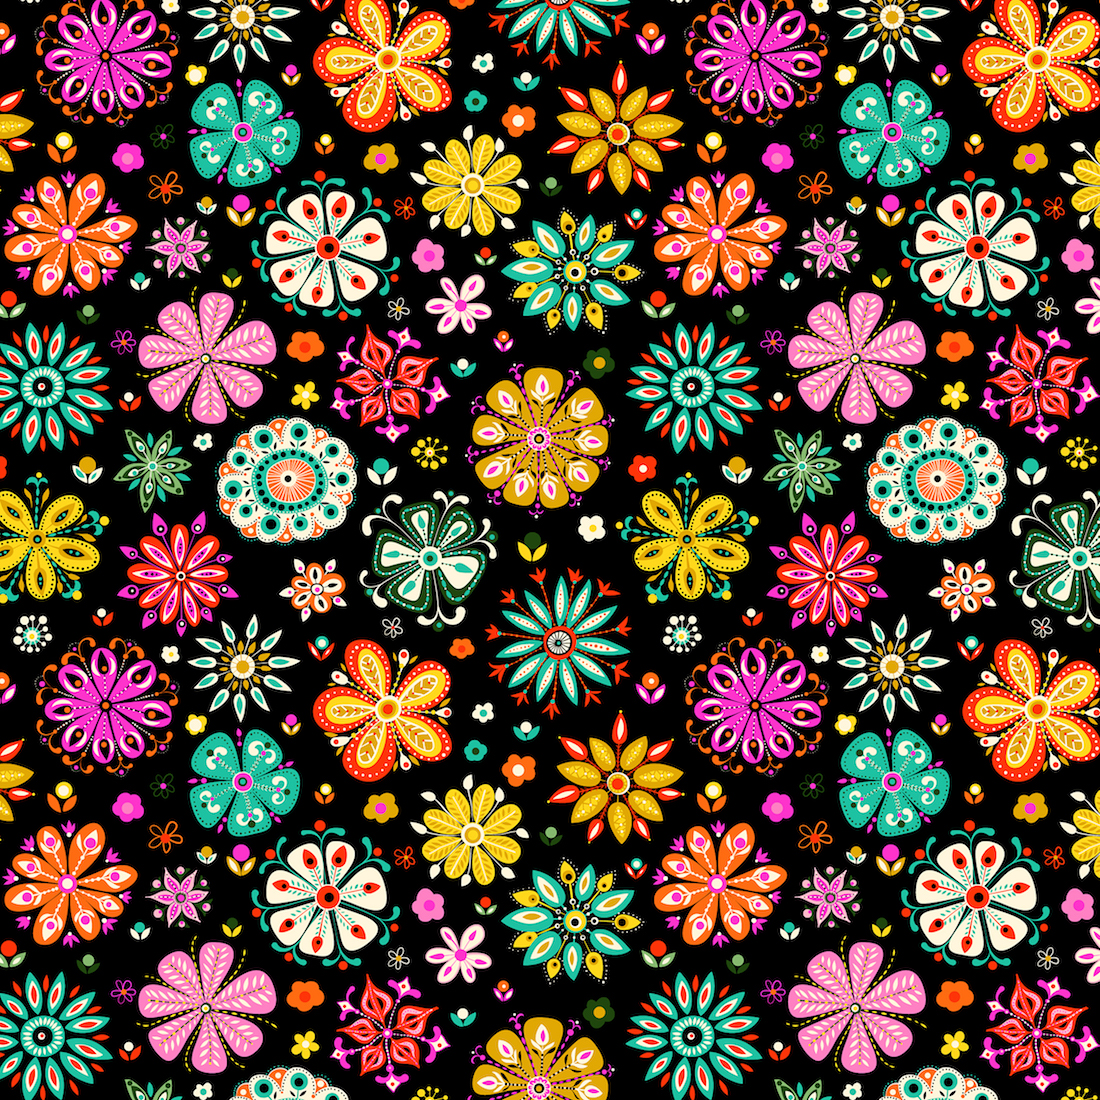 How to repeat automatically seamless pattern in Photoshop? - Graphic Design  Stack Exchange